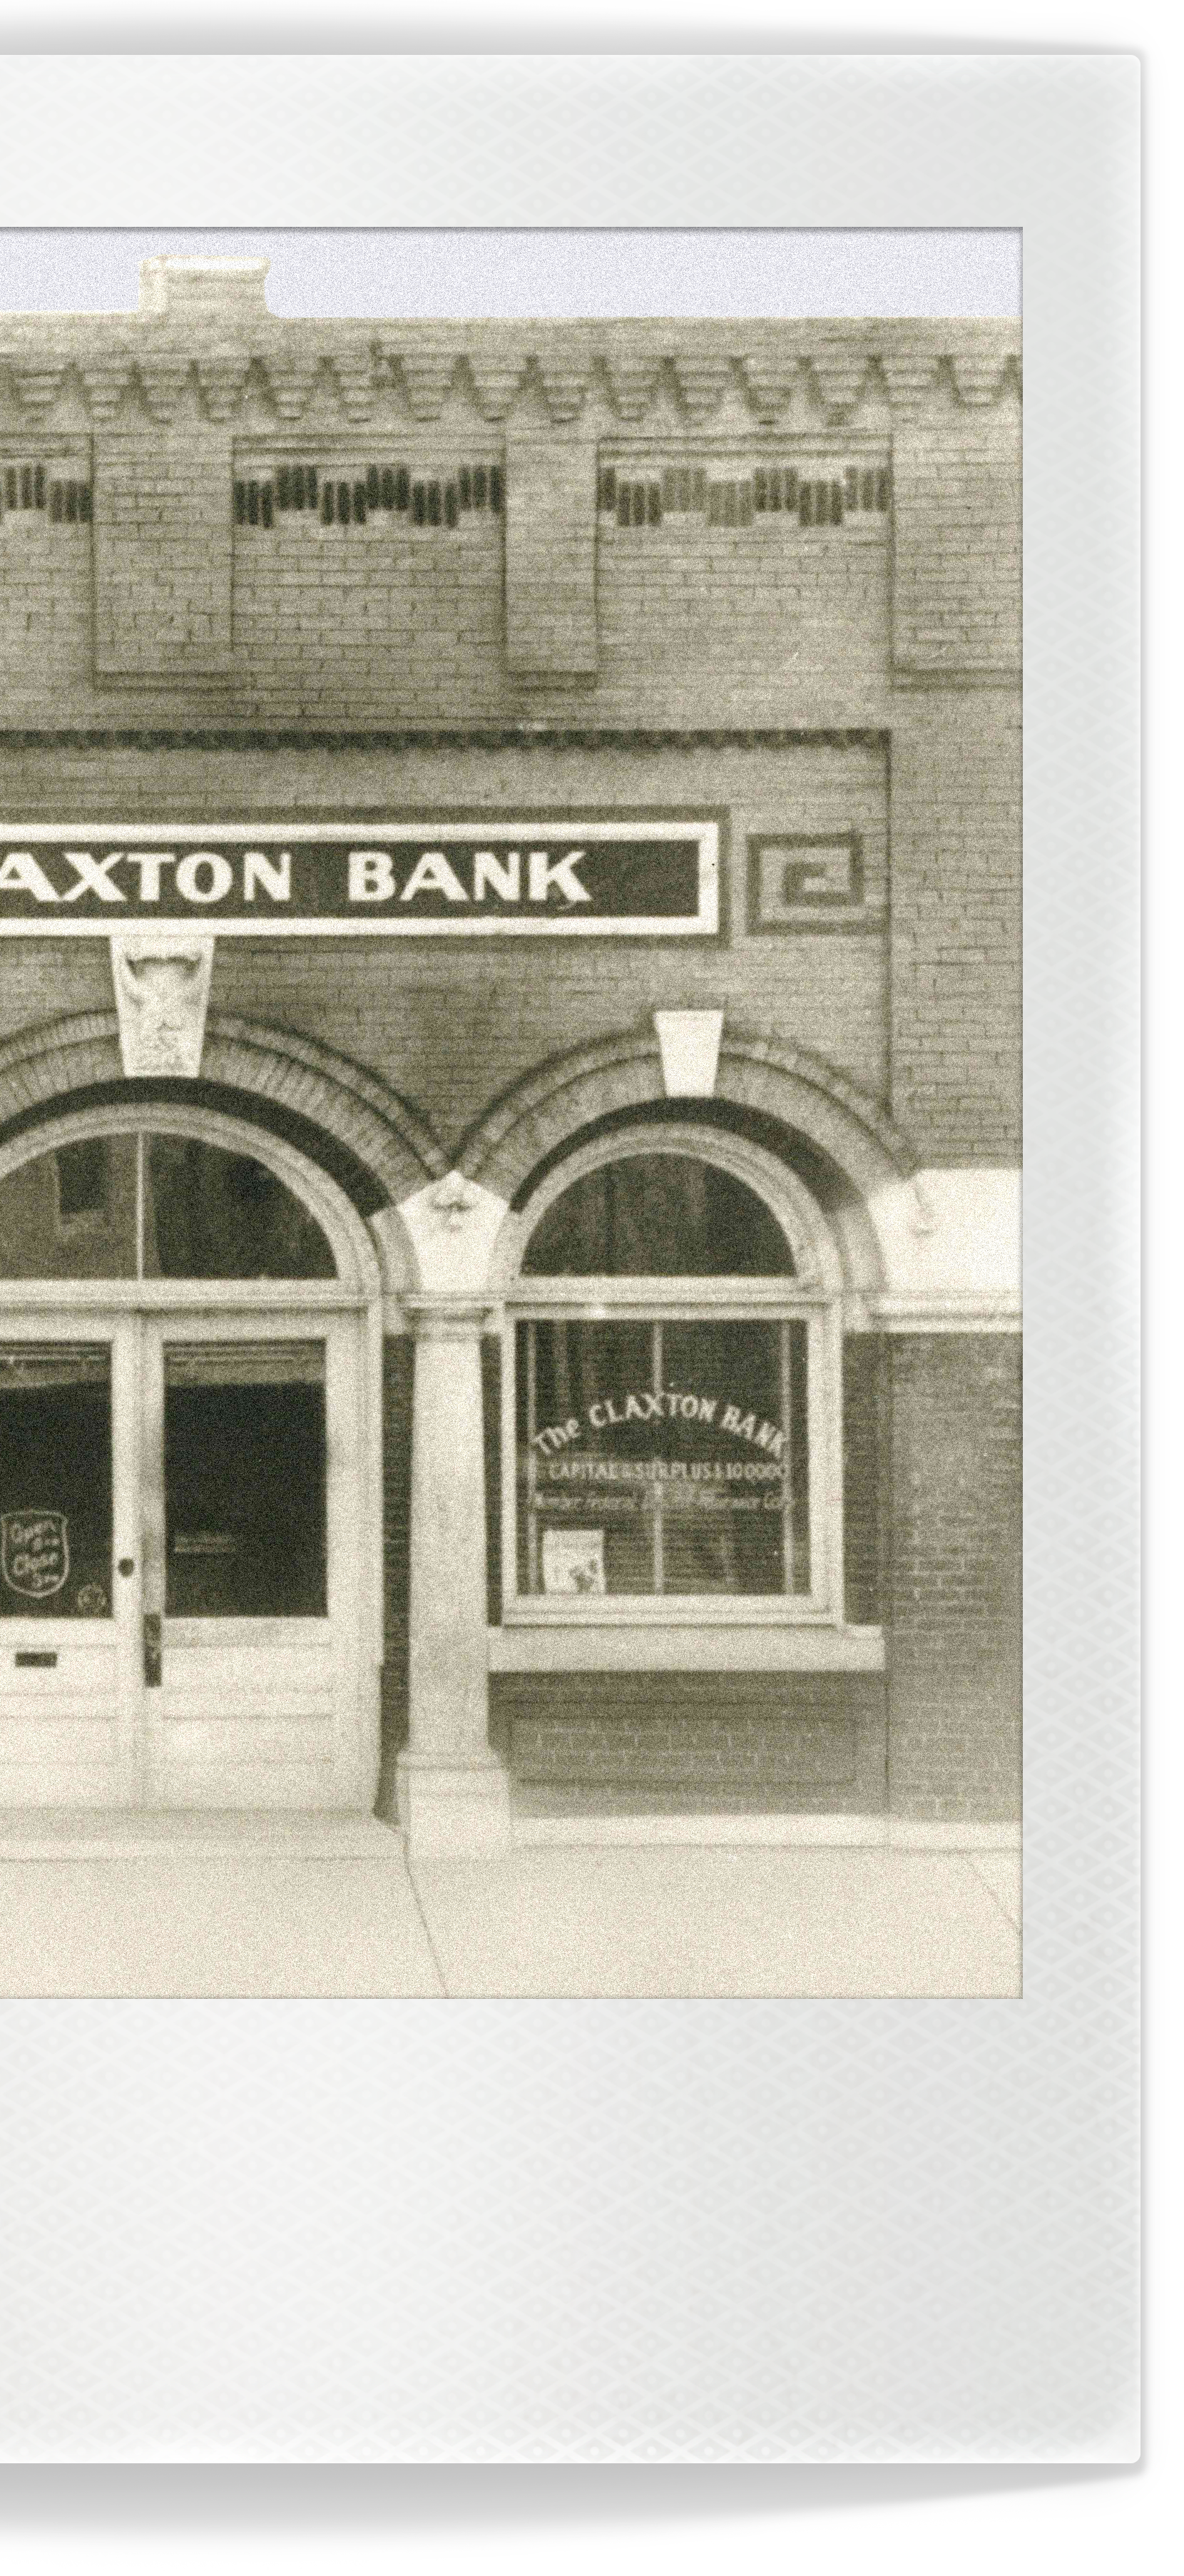 Polaroid of the original The Claxton Bank Building in 1941